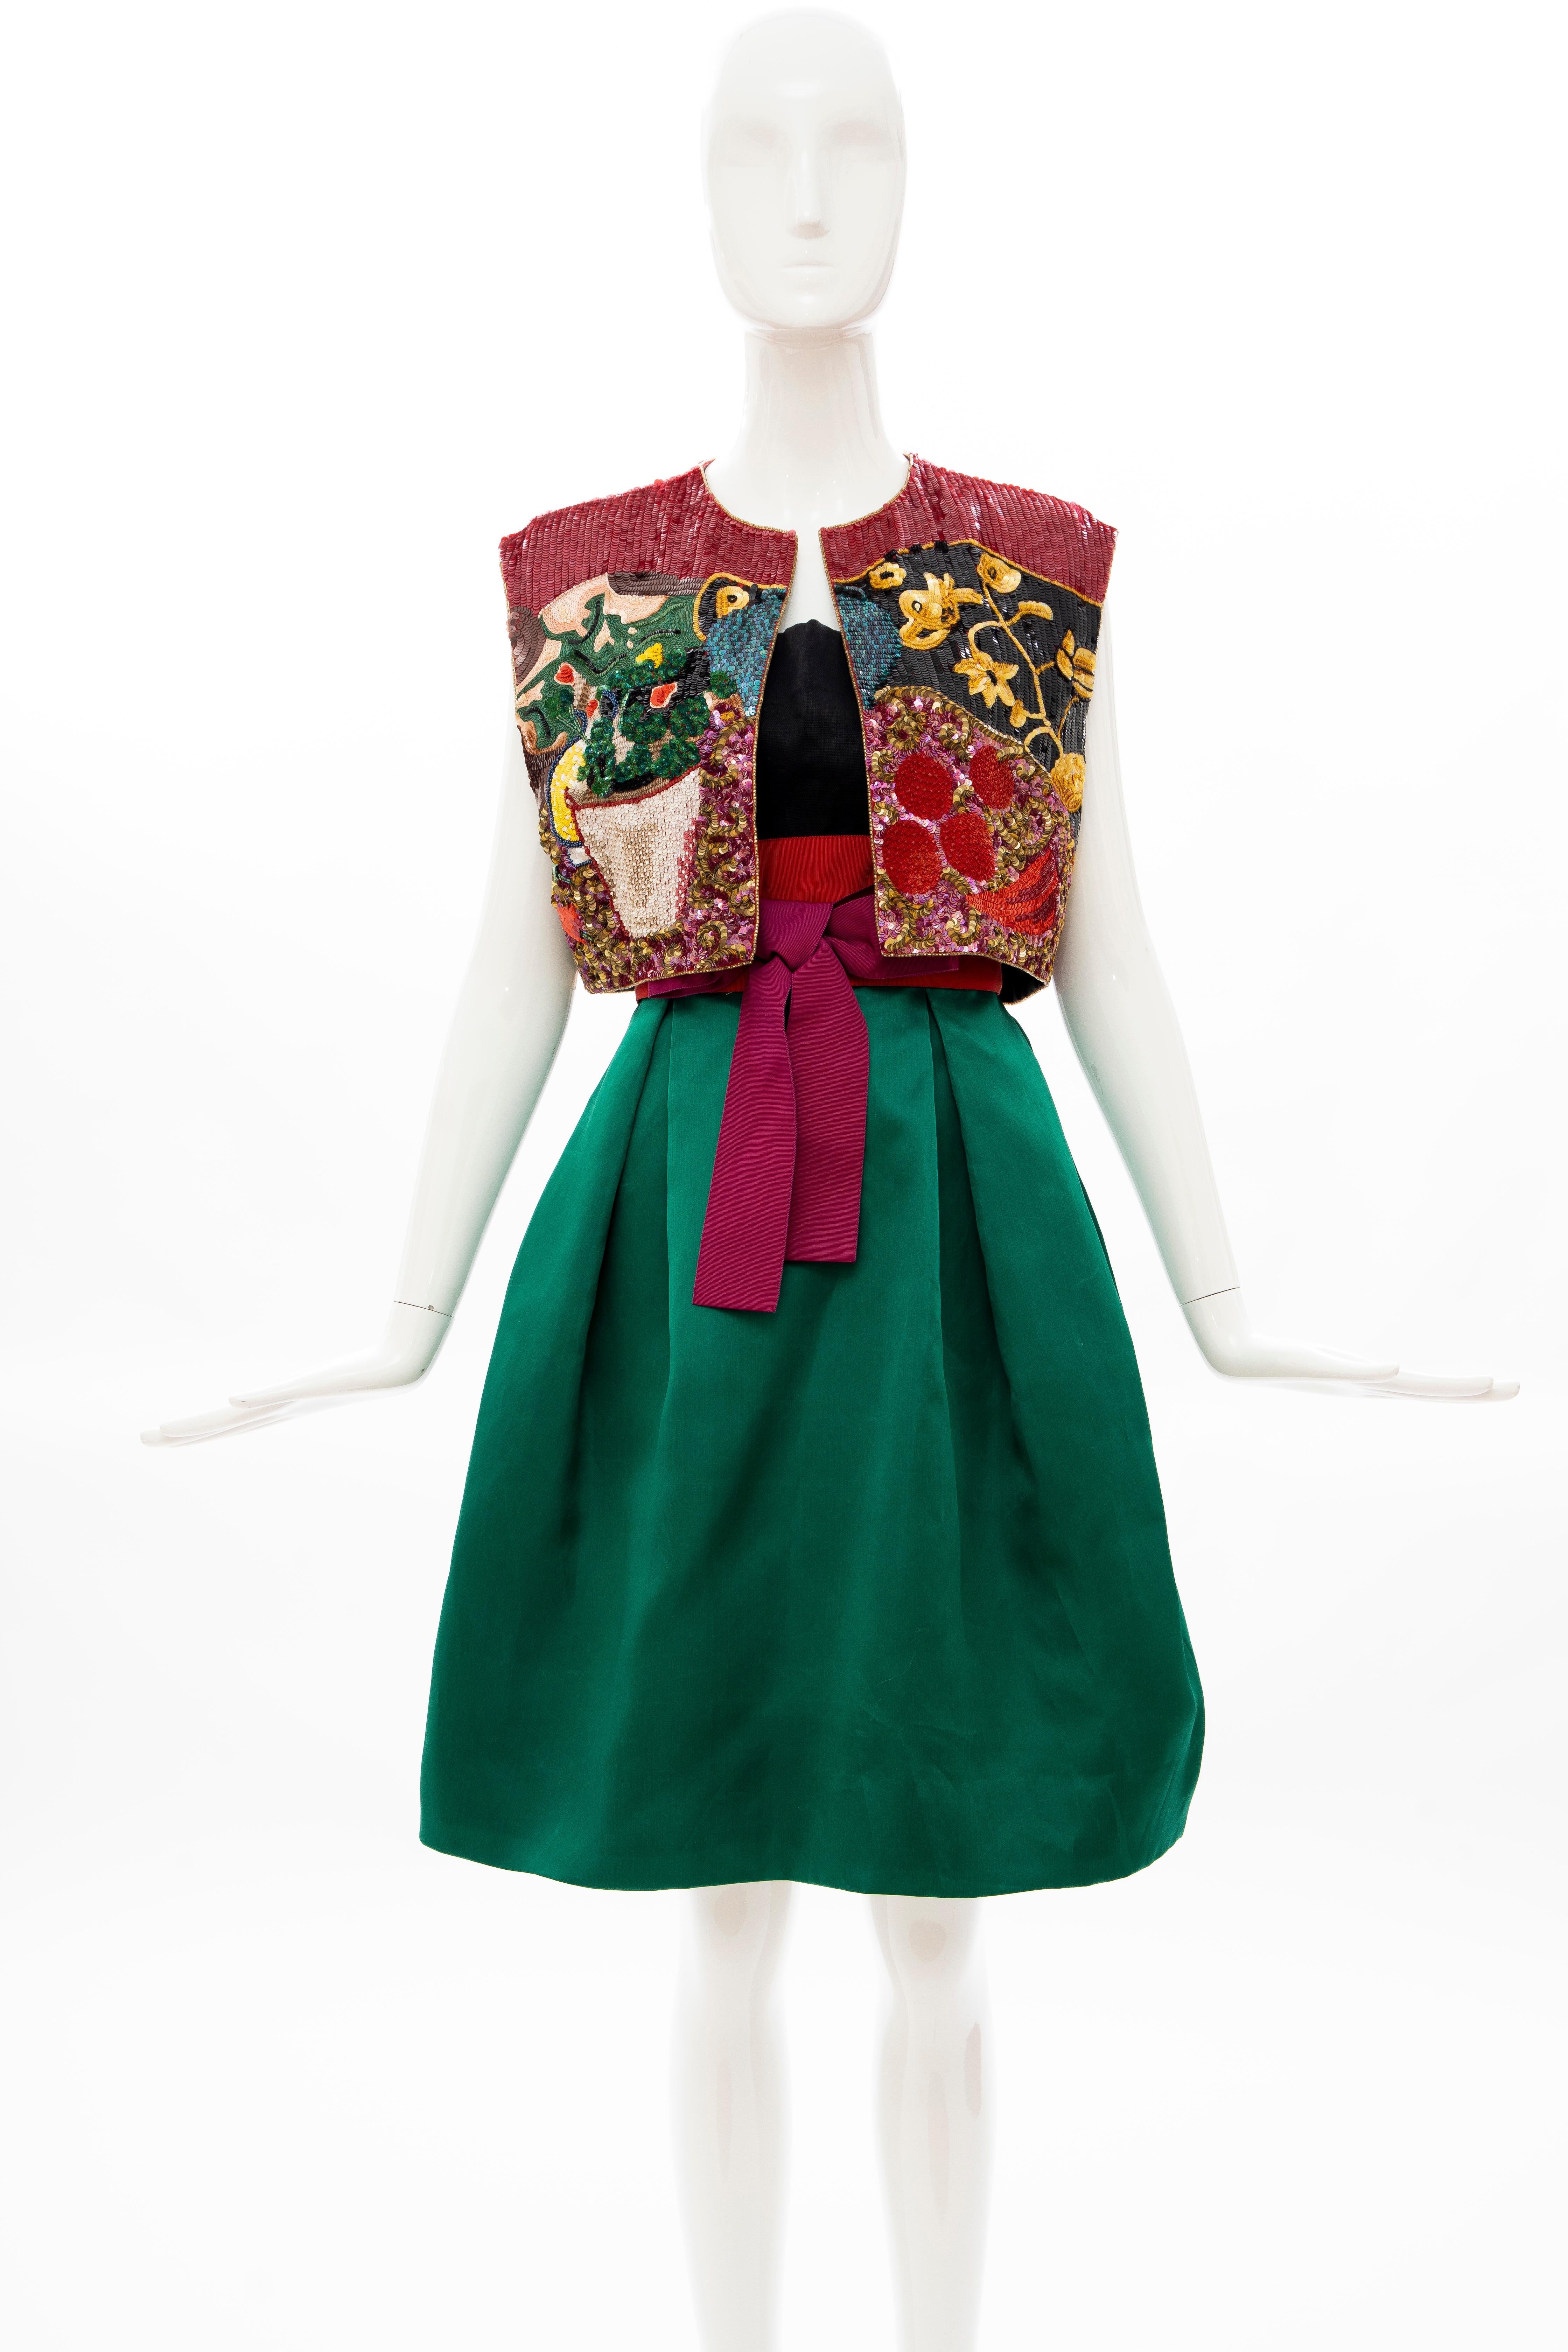 Bill Blass, Runway Spring 1988,  Matisse inspired dress ensemble. Strapless dress with emerald green silk satin box pleated skirt with black tubular linen bodice with grosgrain detail, back concealed zip and hook and eye closure and fully lined.